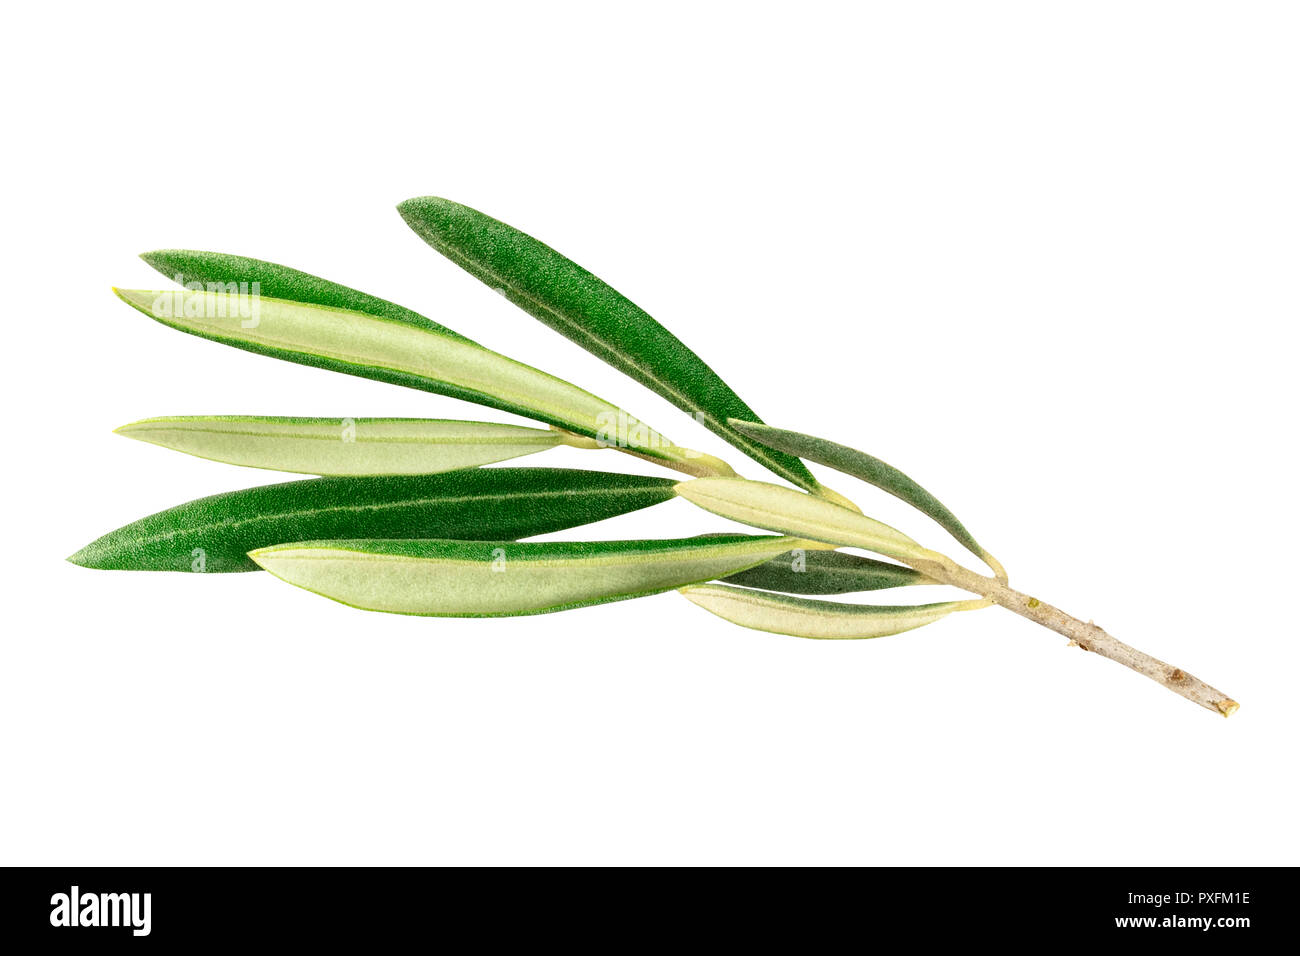 A photo of a vibrant green olive tree branch, isolated on a white background with a clipping path Stock Photo